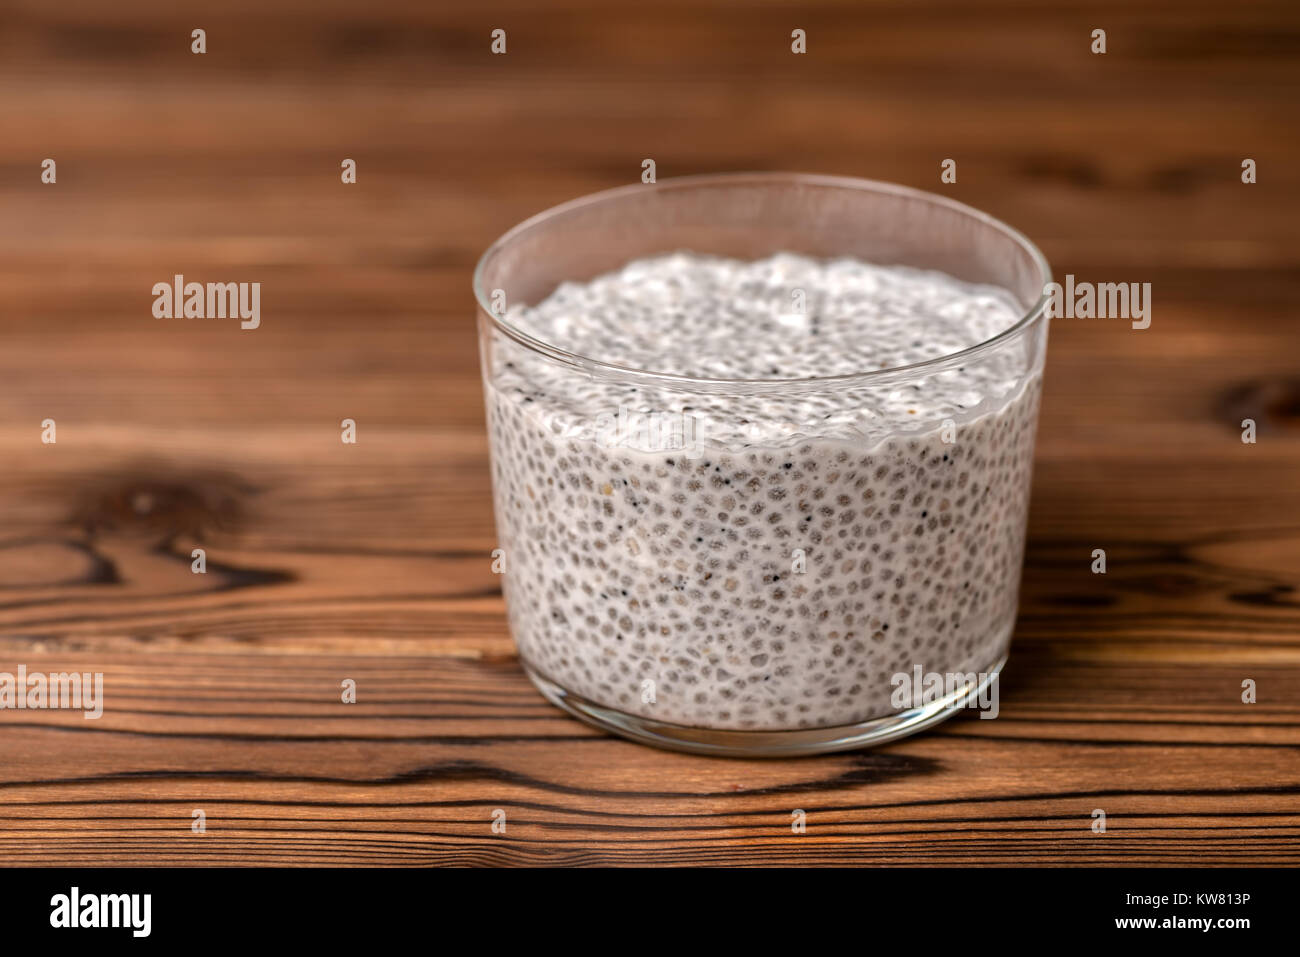 chia seed pudding in glass on wooden background, minimal design Stock Photo